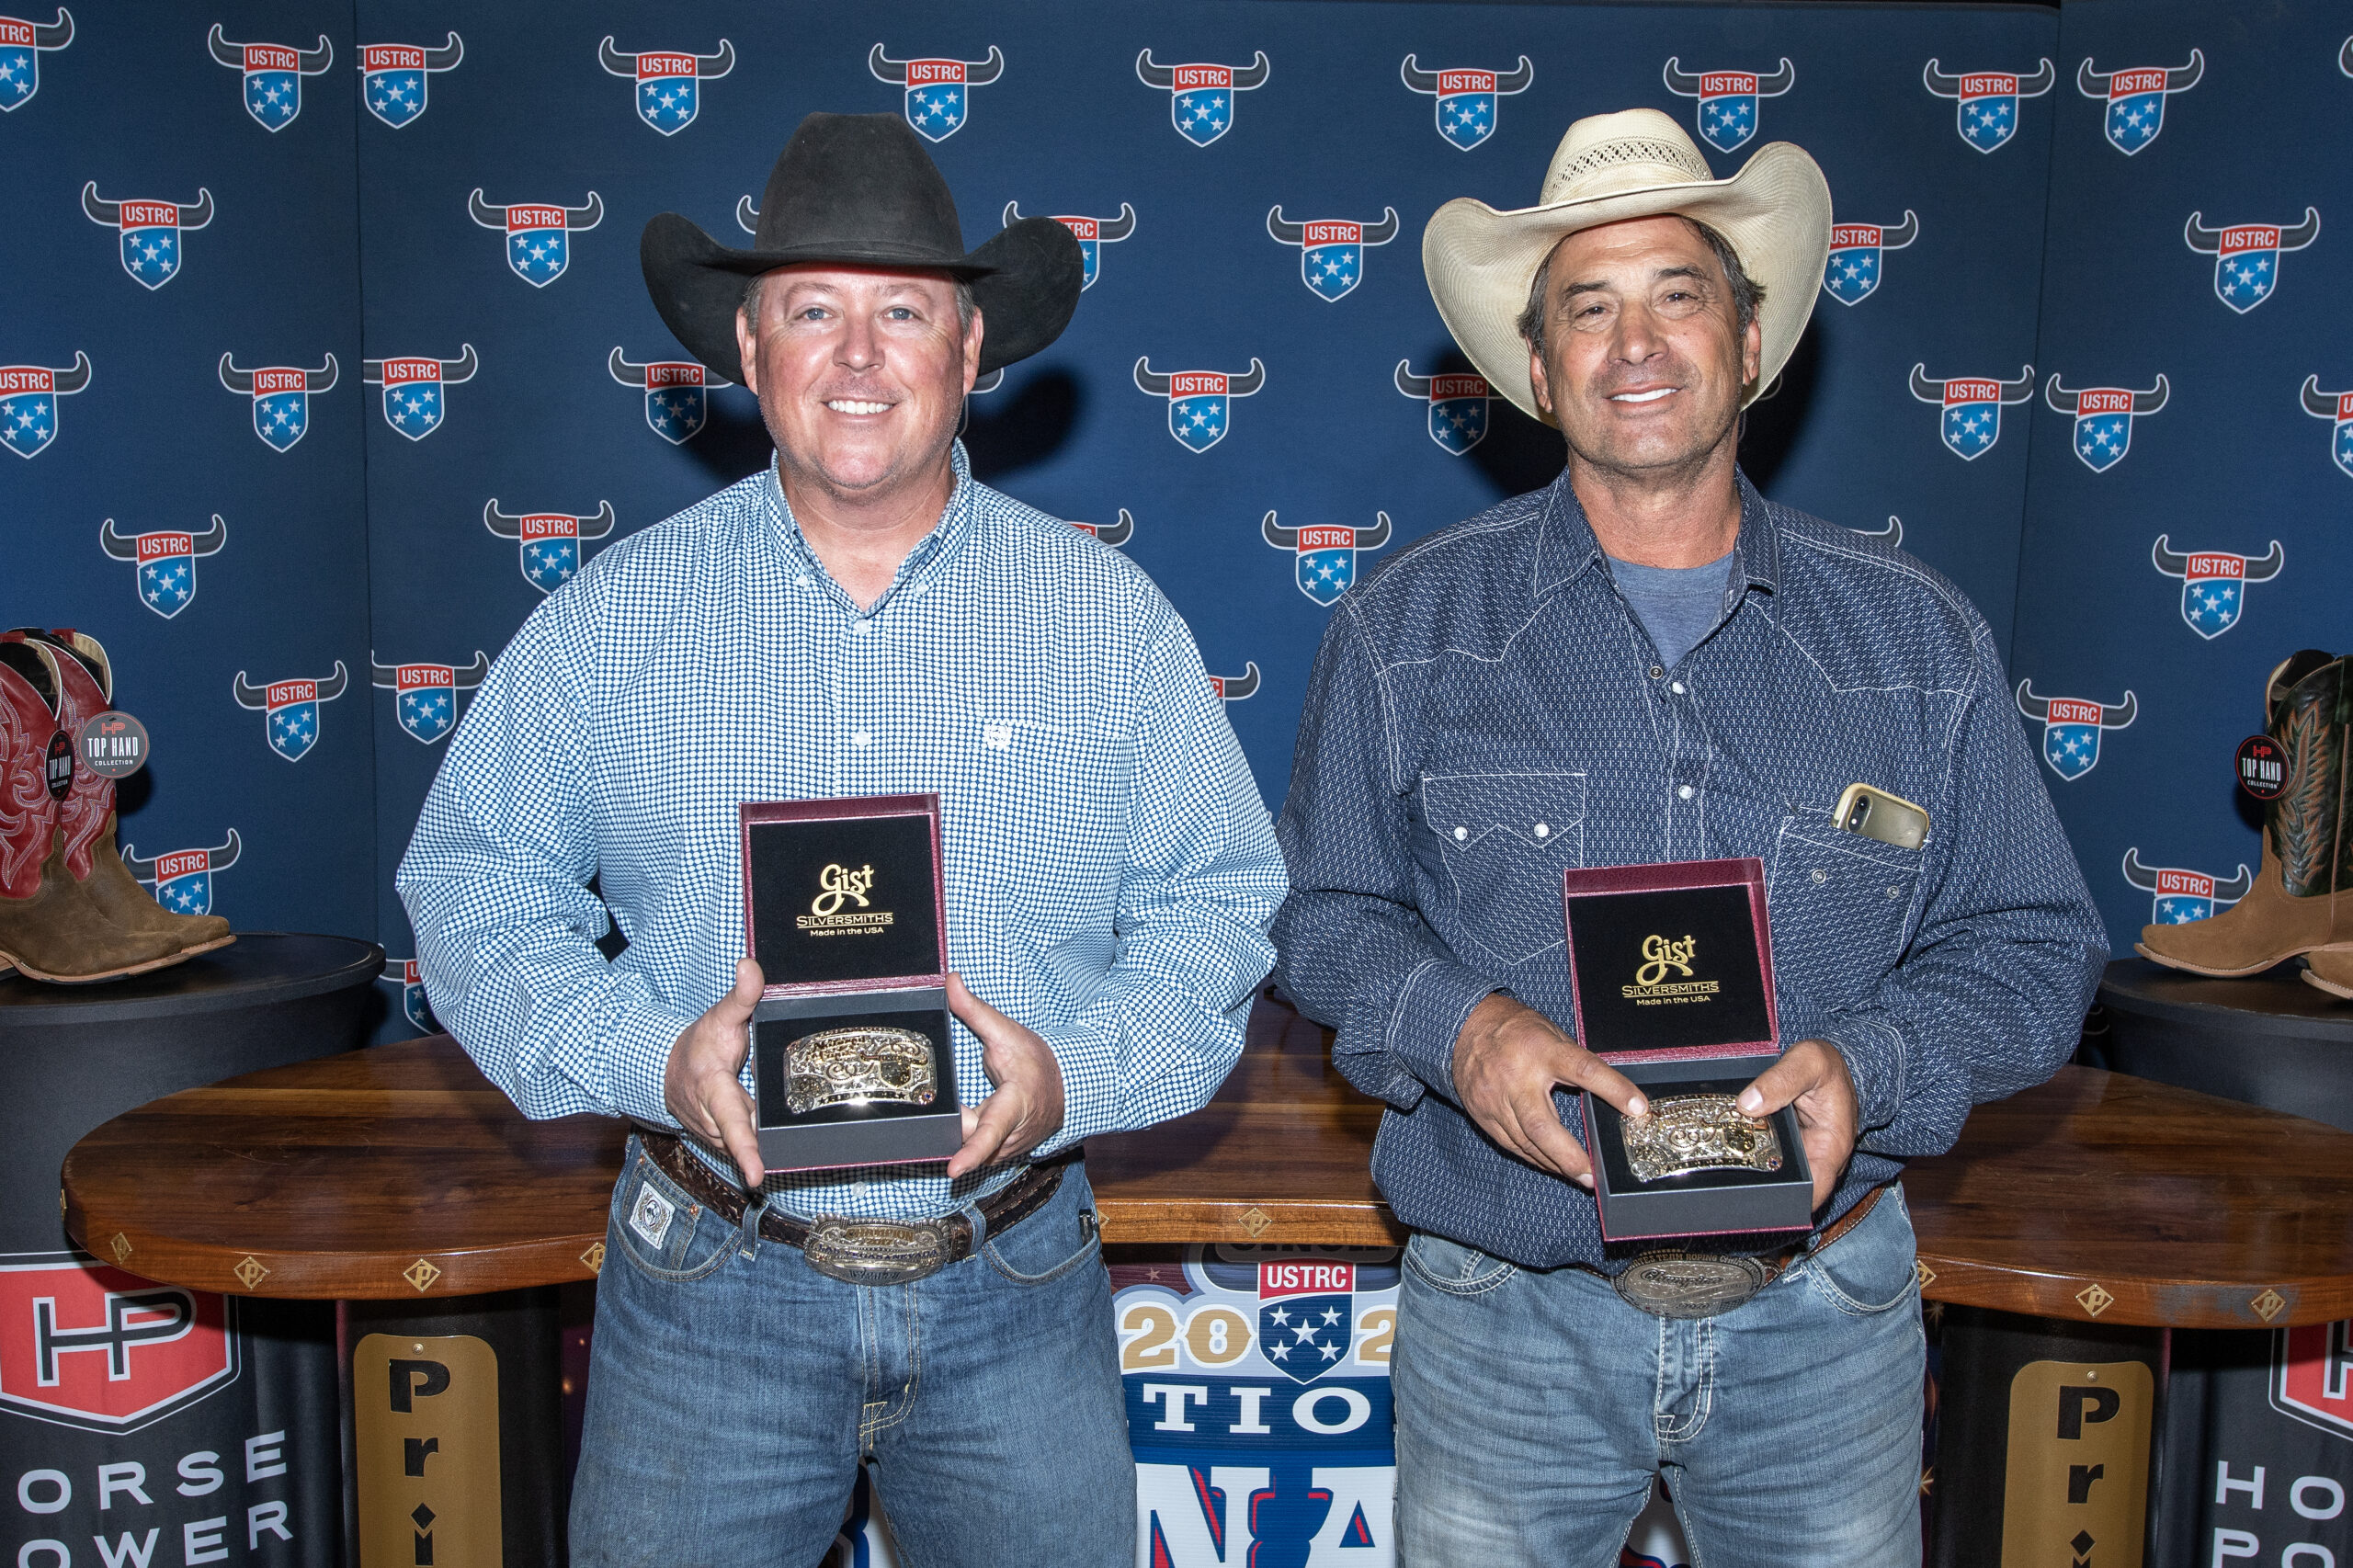 Ronnie Hill and Daniel Shehady pose with their buckles for winning the Horse Power Boots #8.5 Legends Over 50.